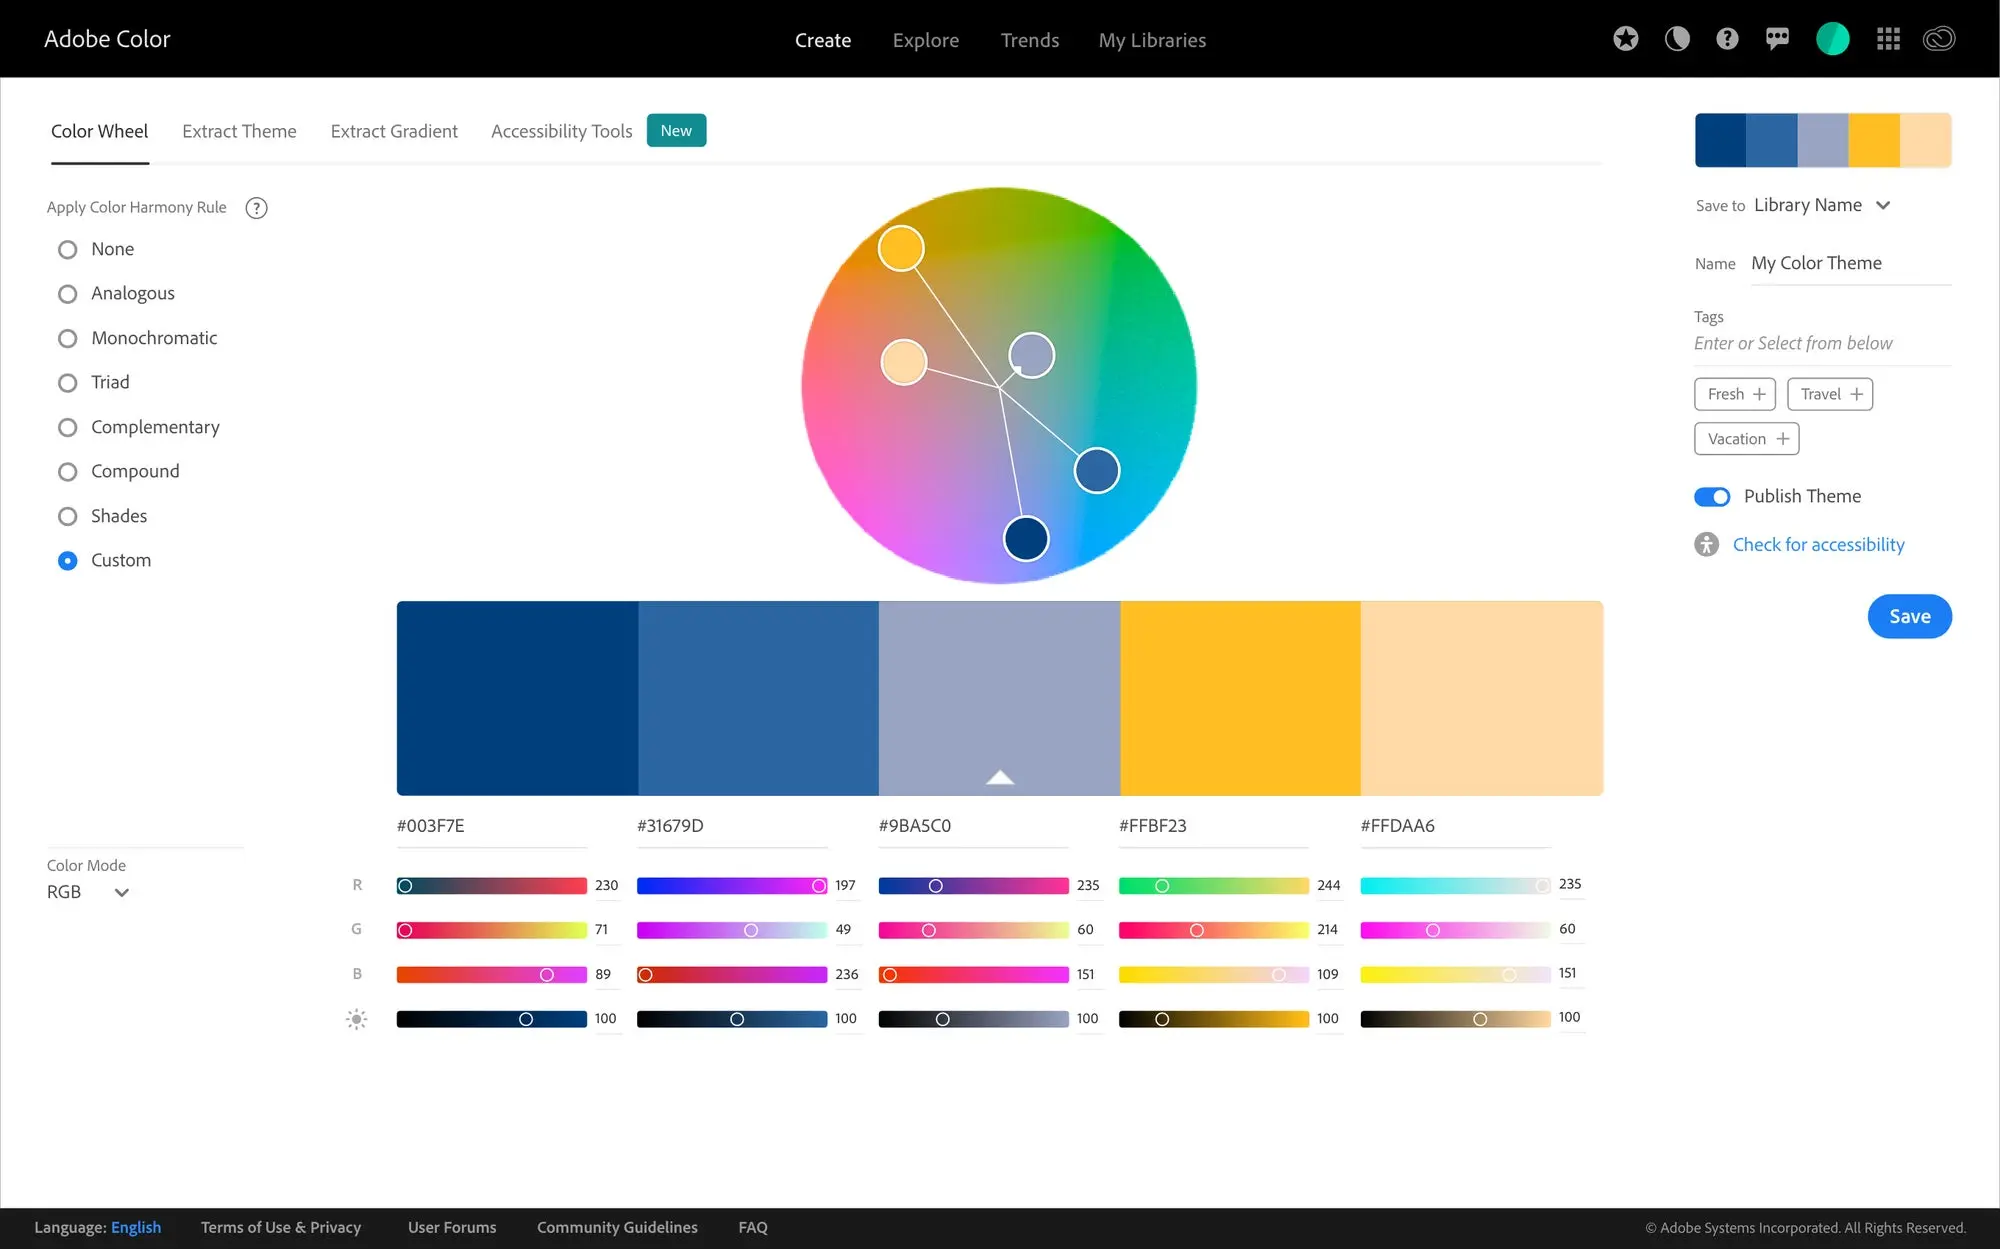 Adobe Color interface showing a color palette with five colors. The five colors appear as circles or pucks within a color spectrum wheel. The interface shows the Create page within Adobe Color and along the sub navigation bar are the options: Color Wheel, Extract Theme, Extract Gradient, Accessibility Tools. Color Wheel is selected.